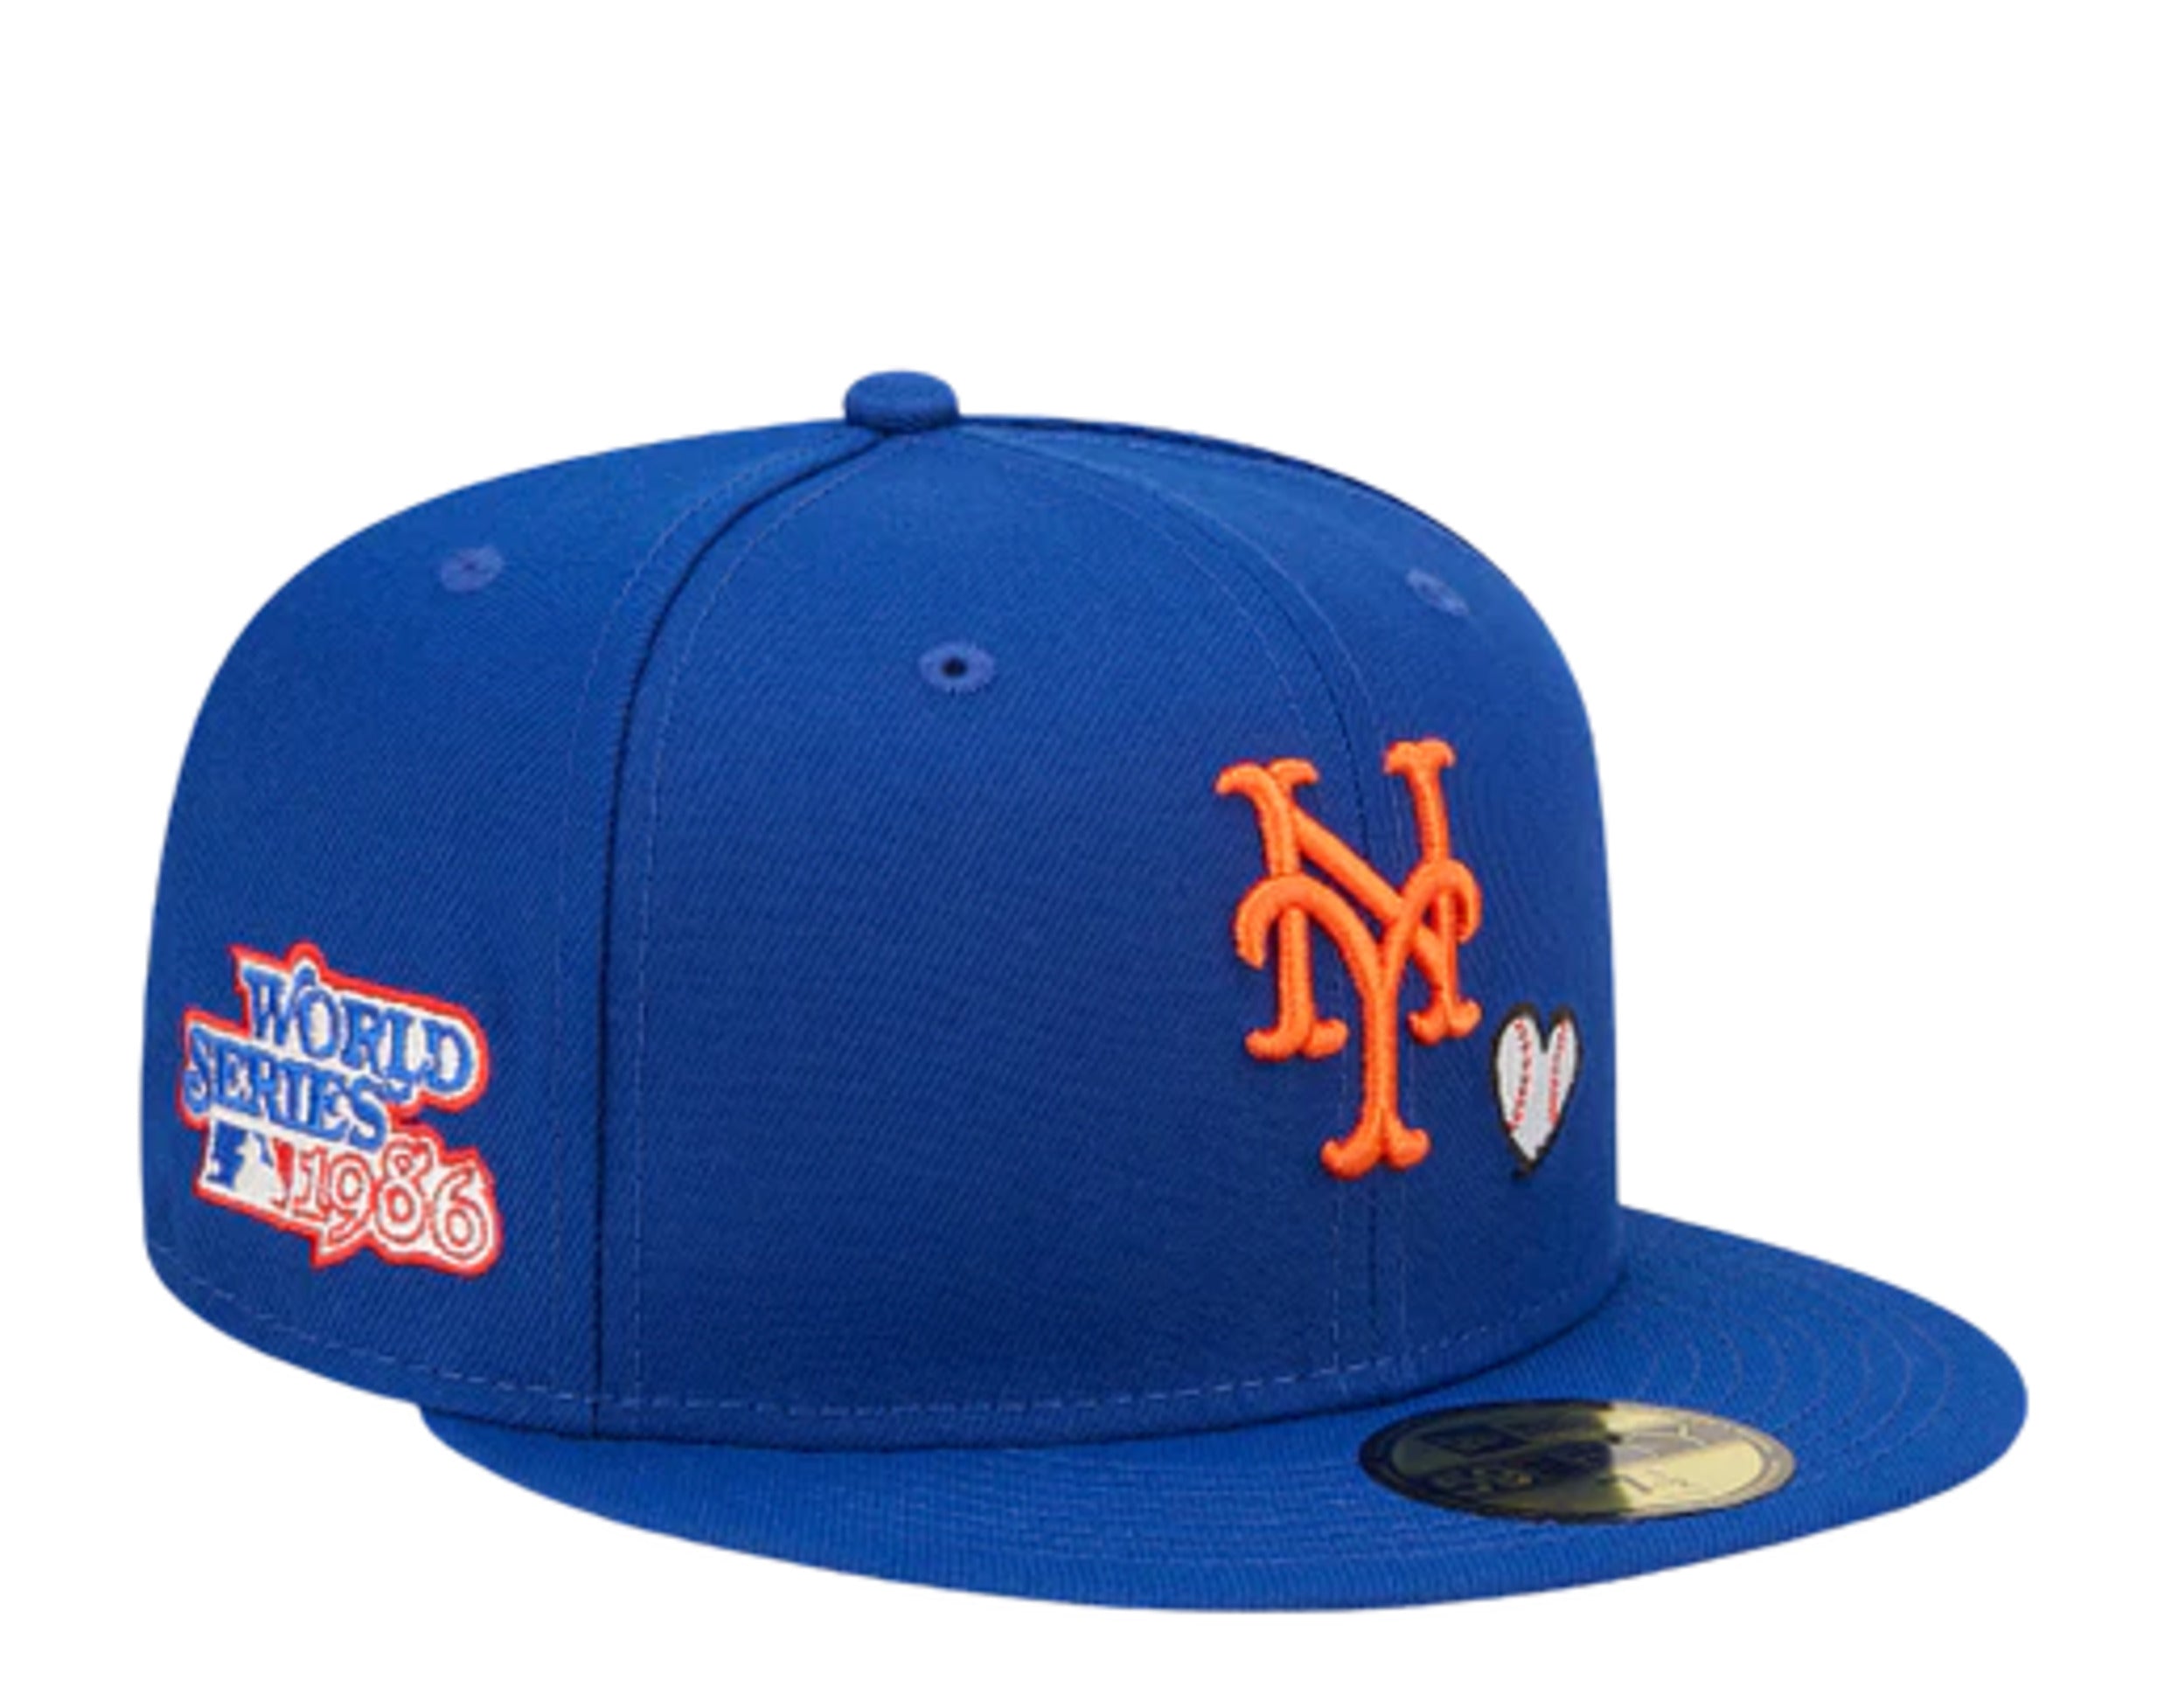 MLB New York Mets New Era 59 Fifty Fitted Hat for Sale in Fontana